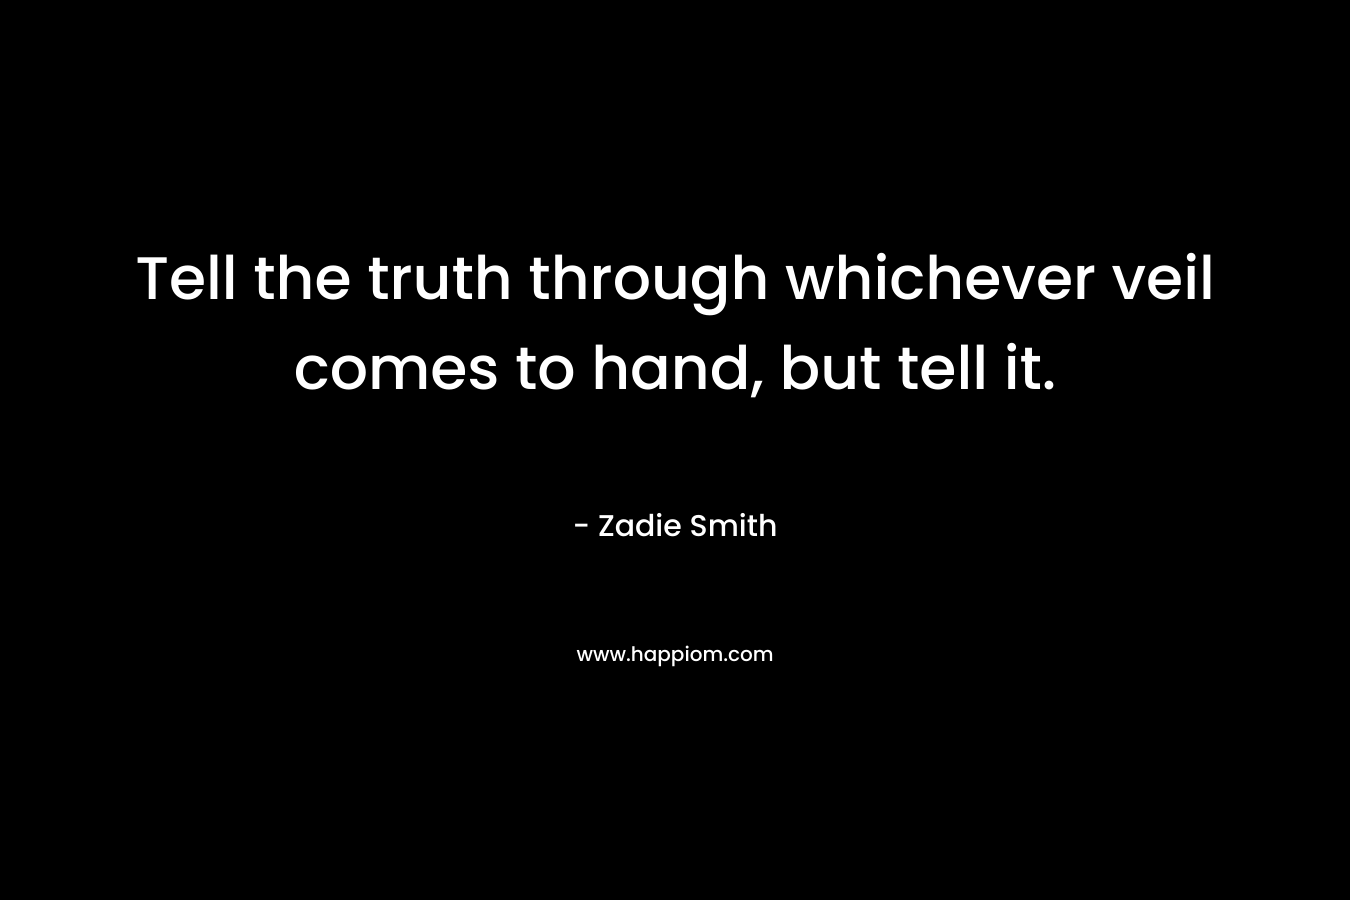 Tell the truth through whichever veil comes to hand, but tell it.